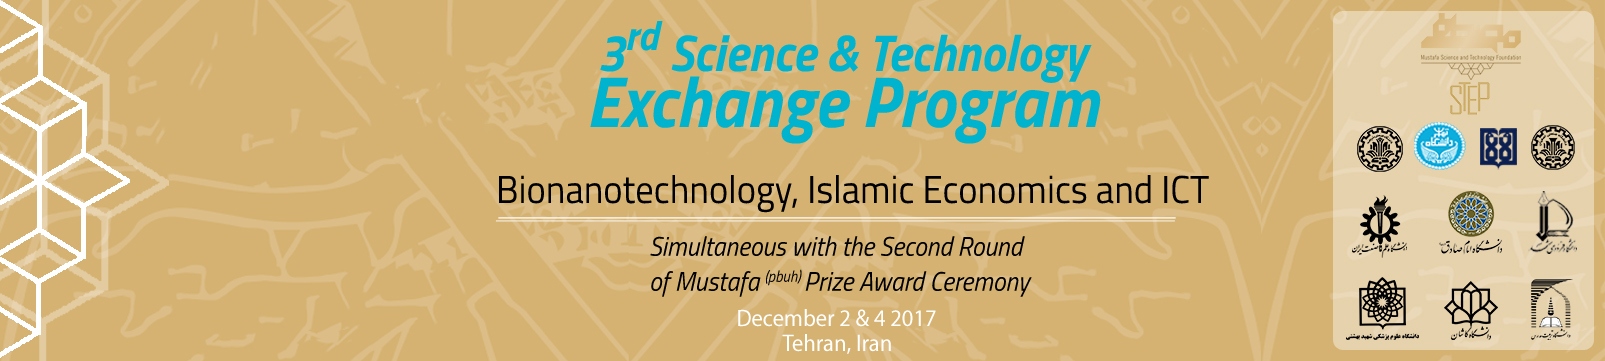 3rd Science and Technology Exchange Program